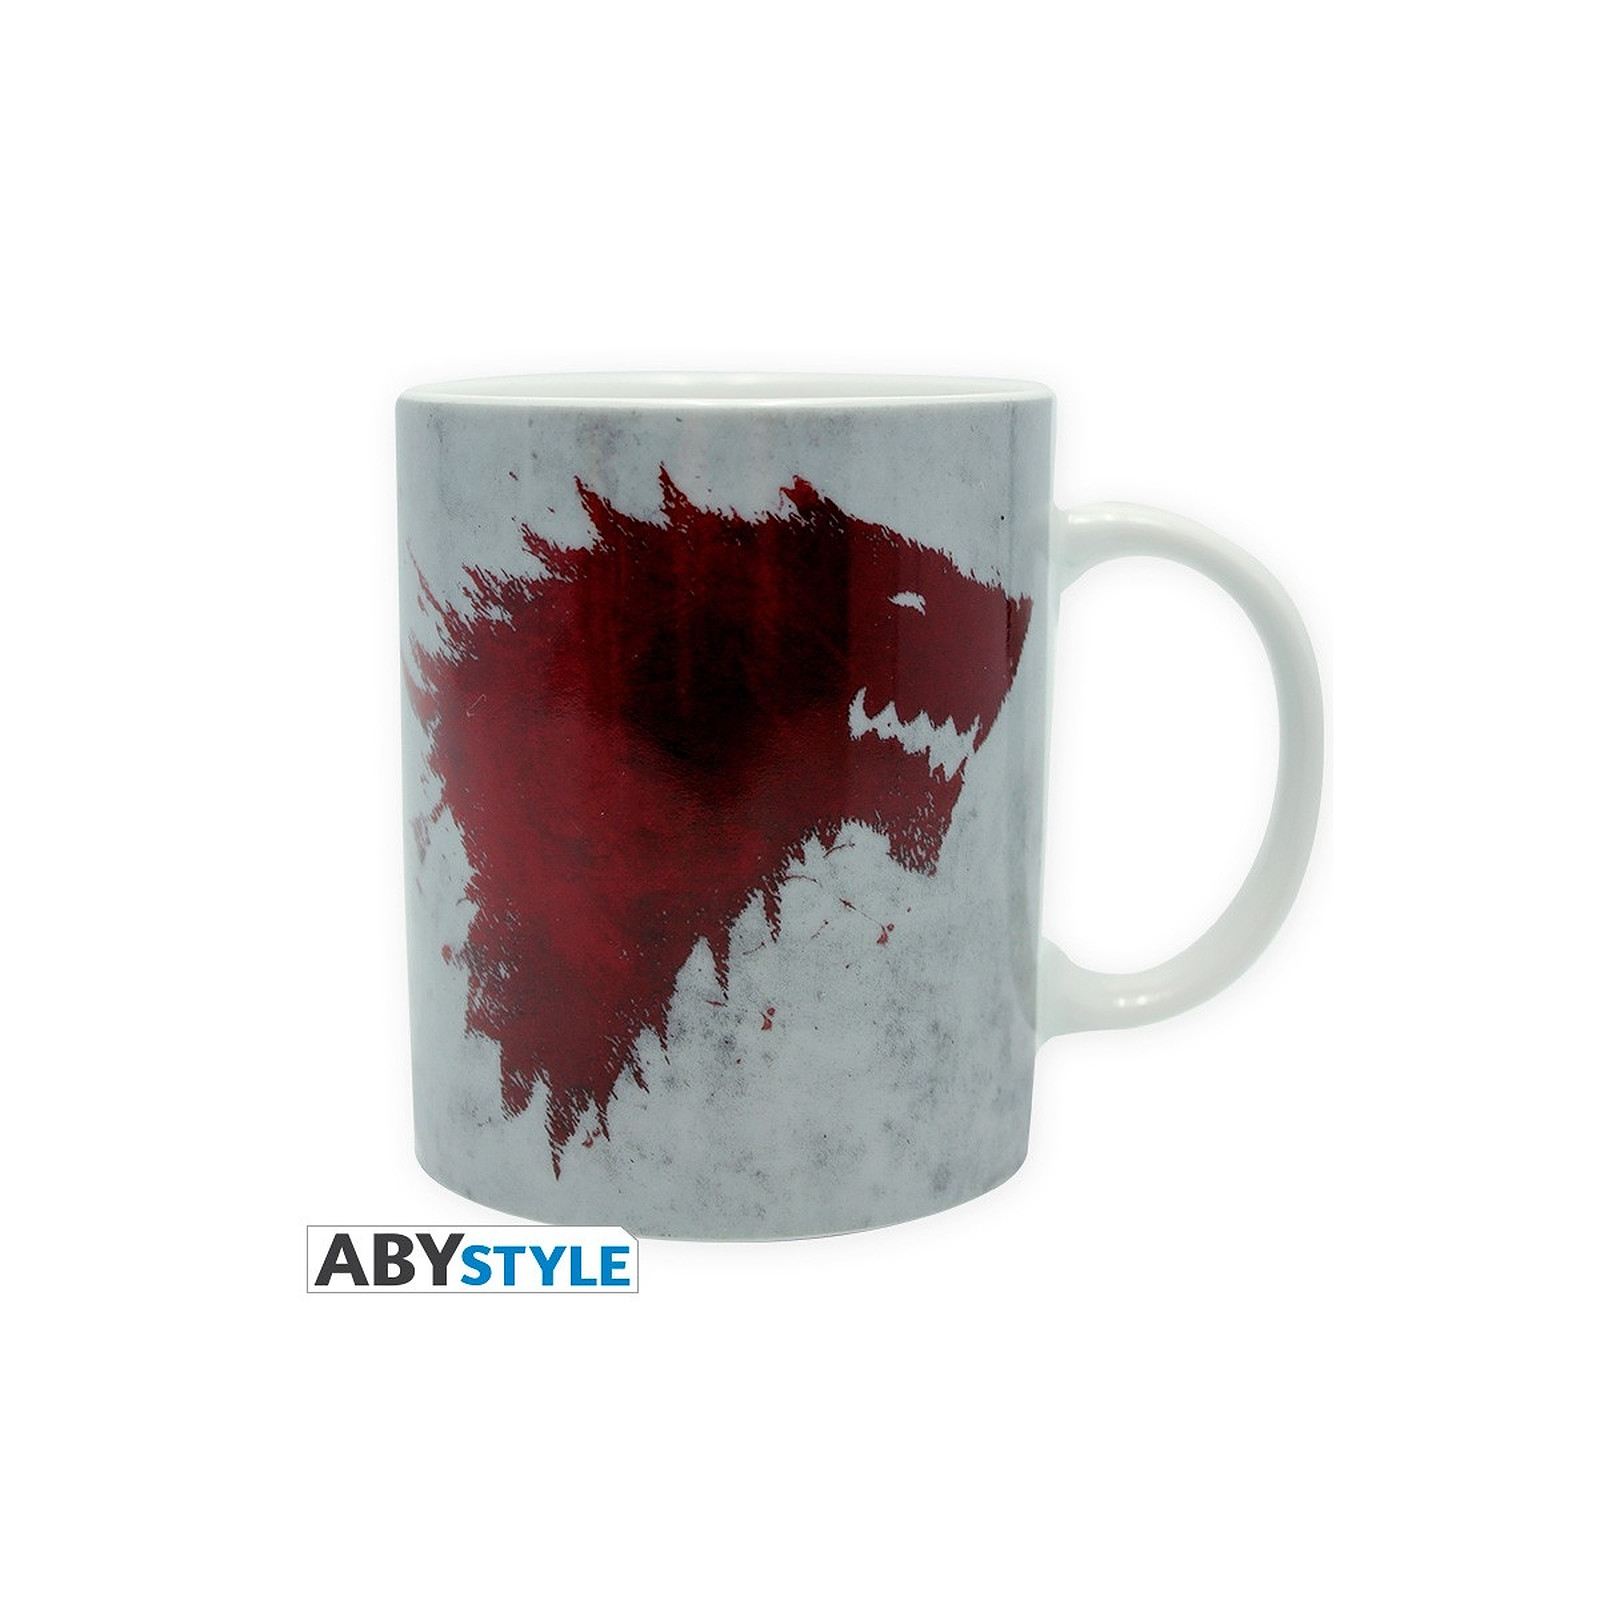 GAME OF THRONES - Mug - 320 ml - The North remembers - porcl.ac boite - Mugs Abystyle